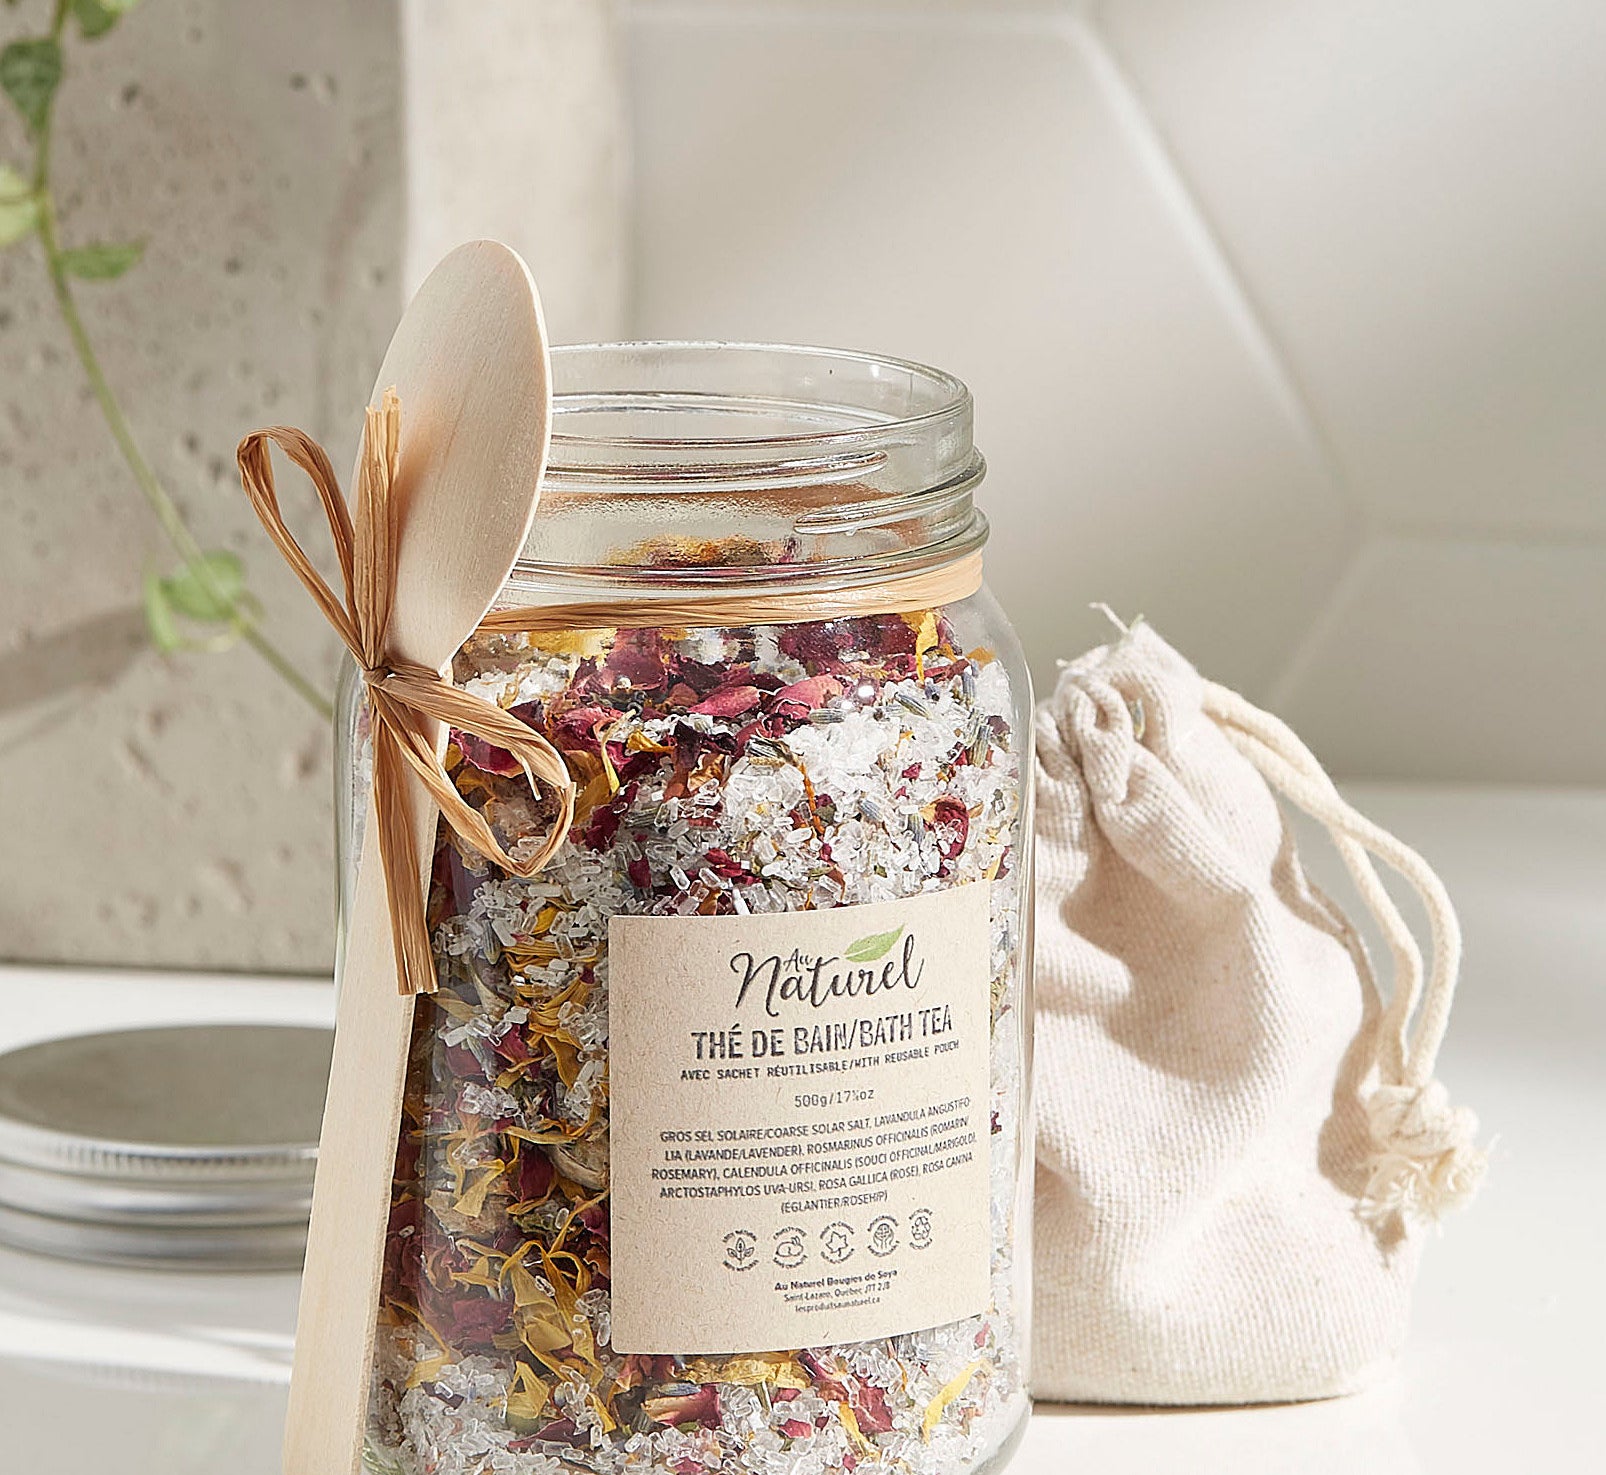 A large jar filled with bath salts There is a small wooden spoon tied around the jar with a string